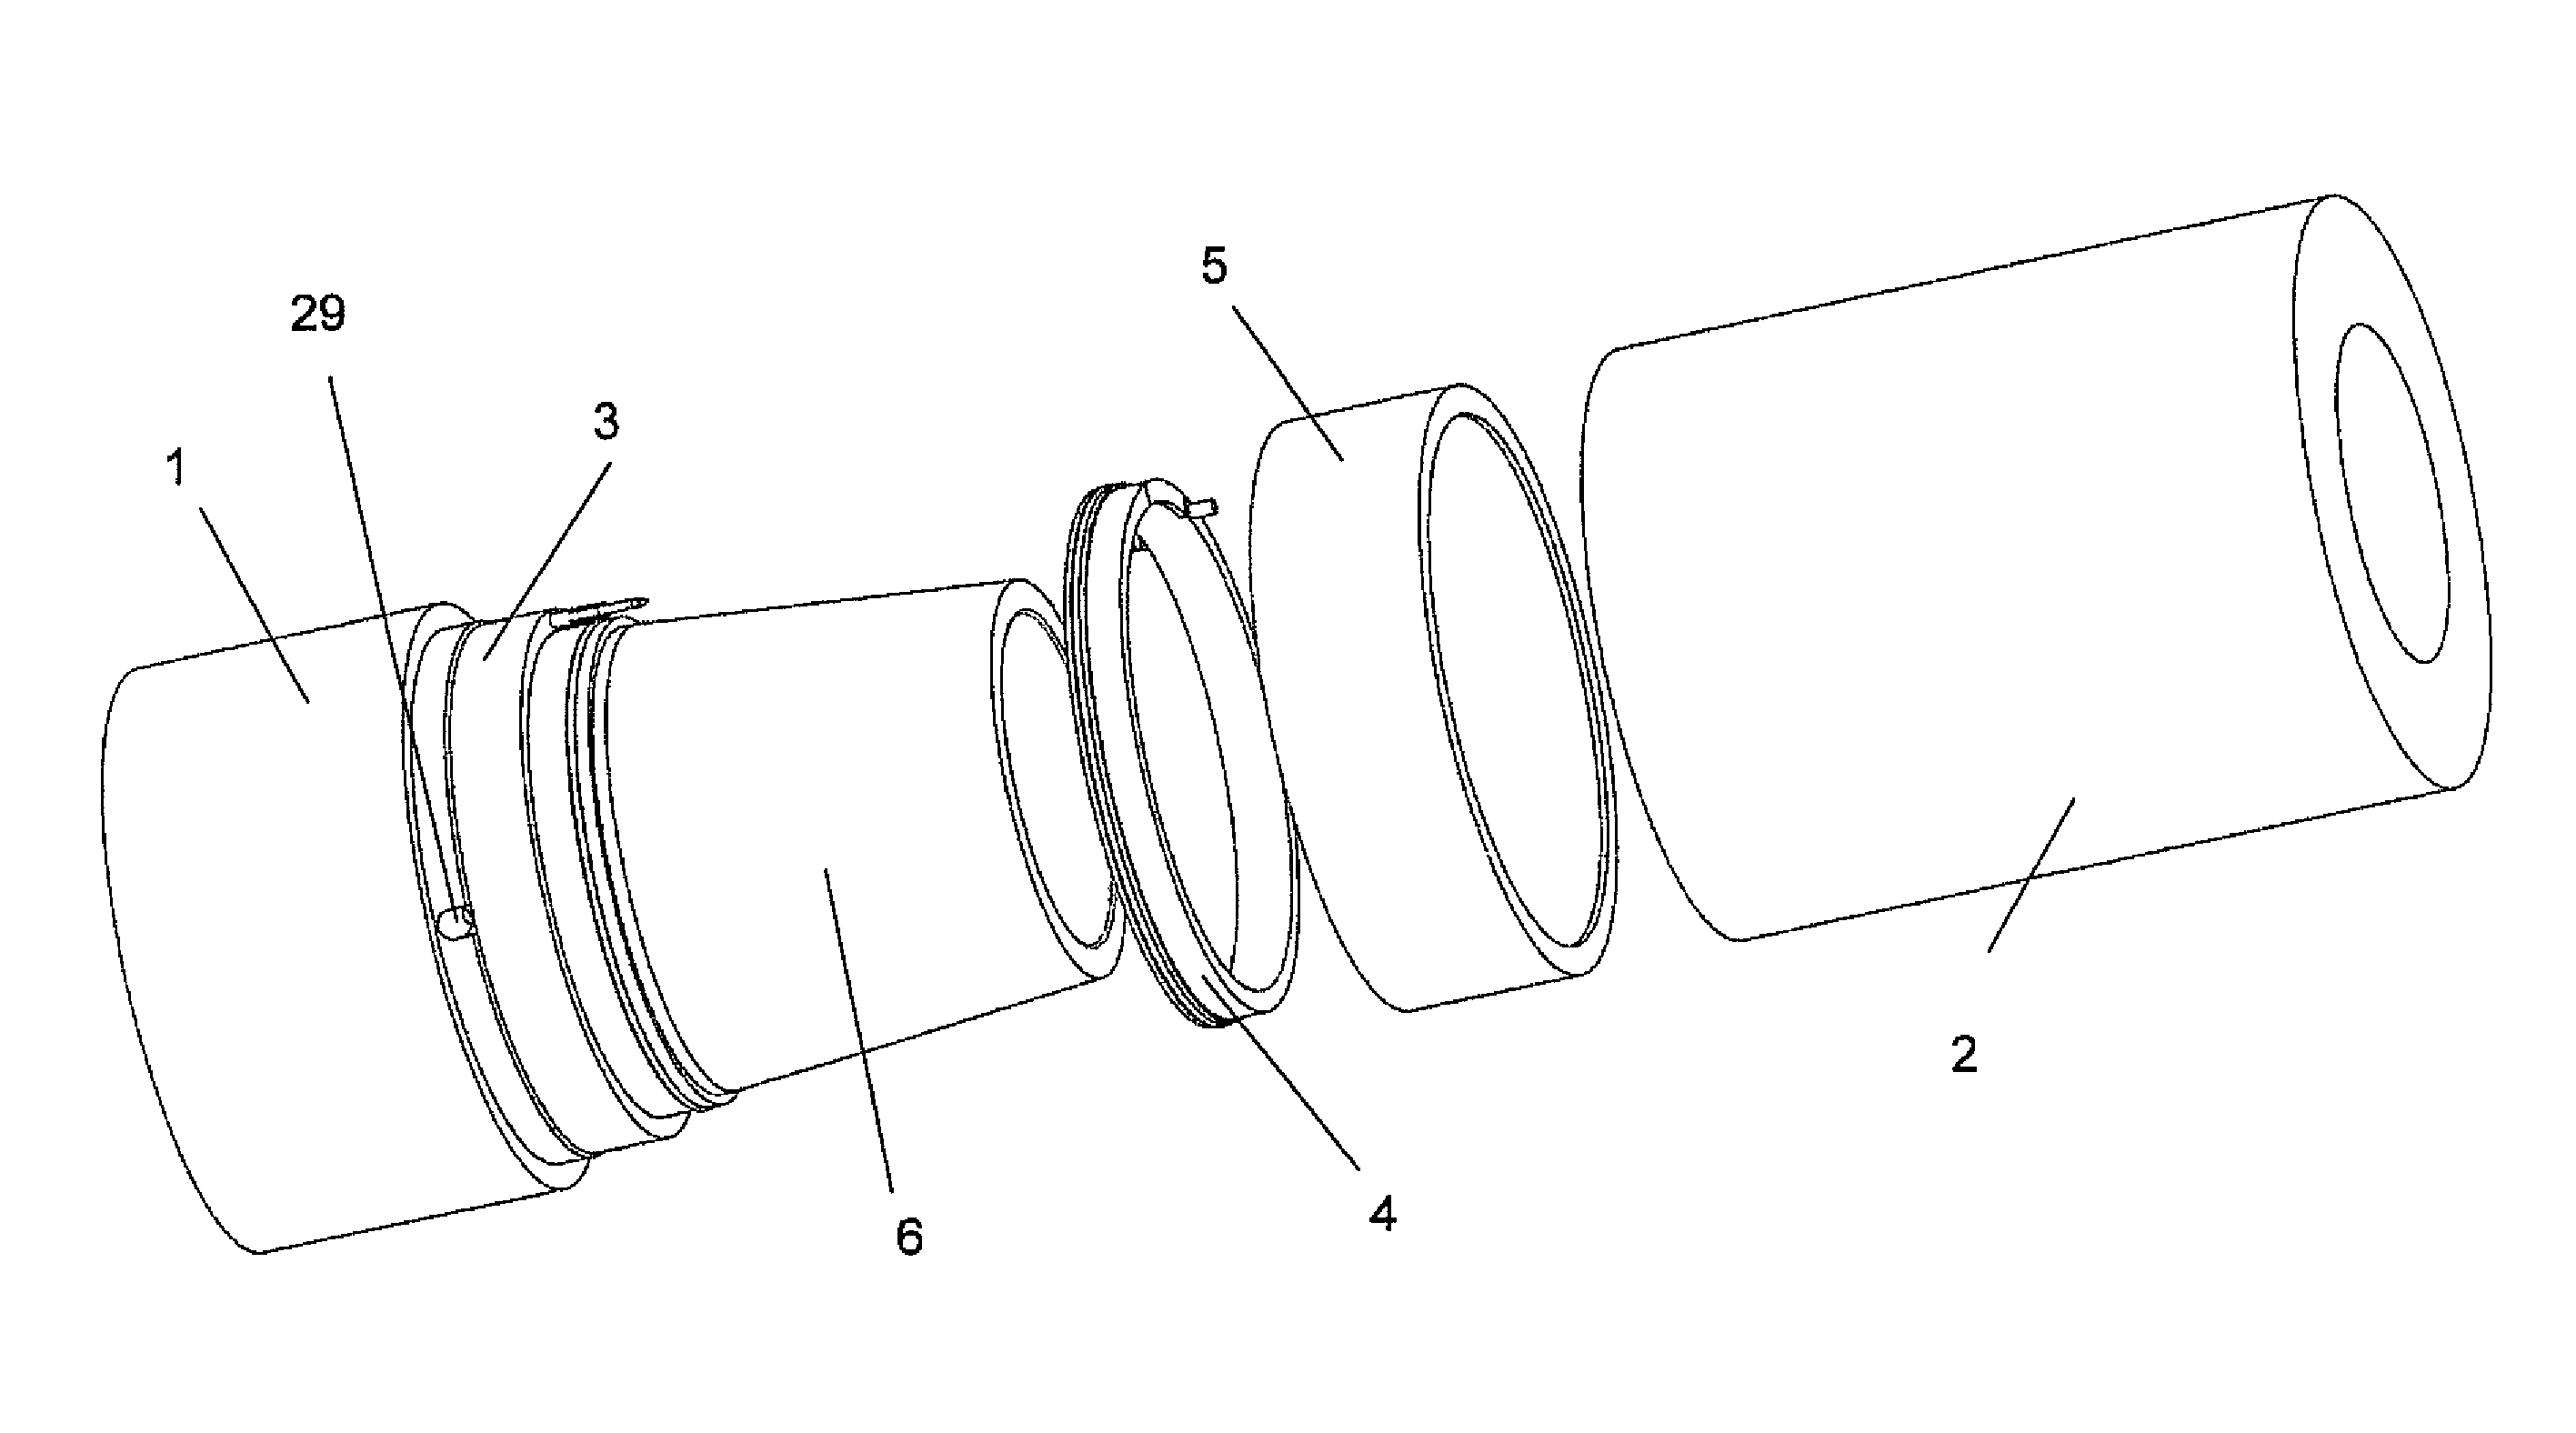 Device for connecting electrical lines for boring and production installations